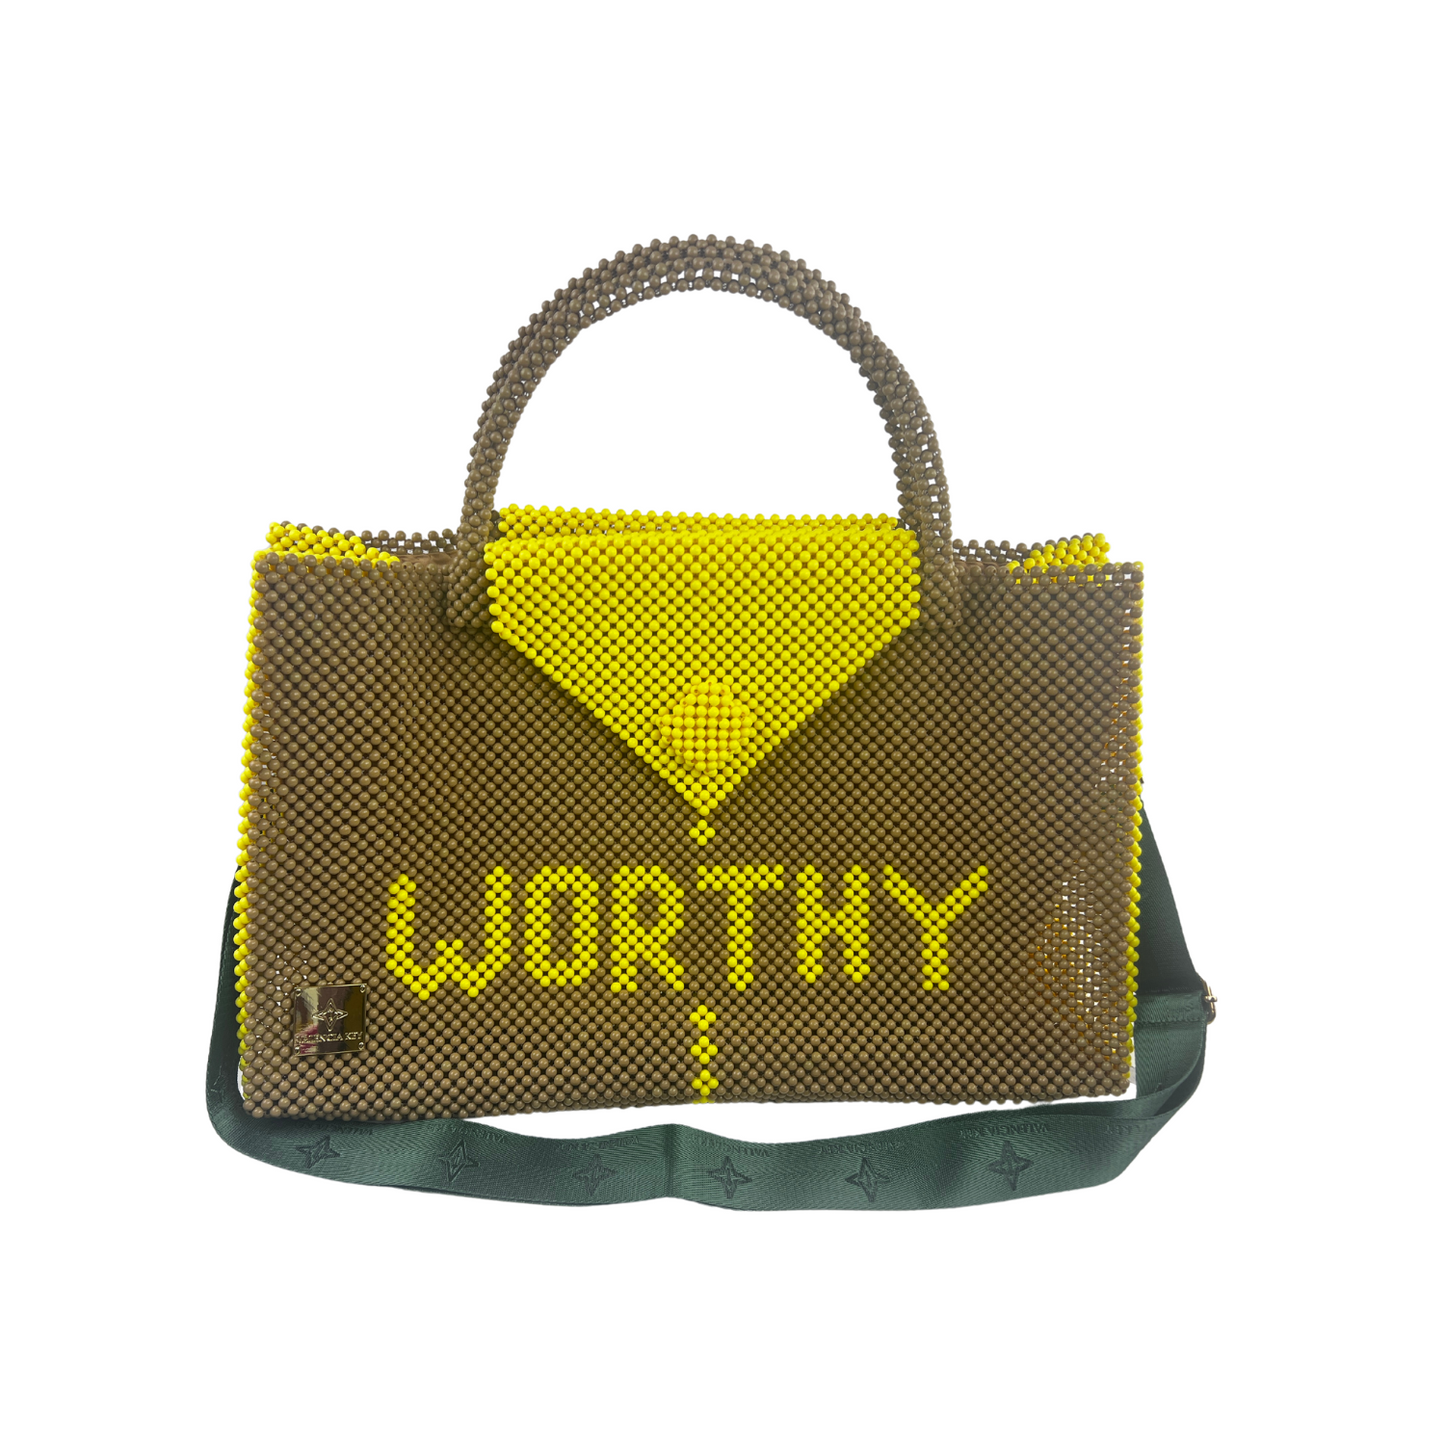 VALENCIA KEY WORTHY AMBITION Large Tote Tan and Yellow